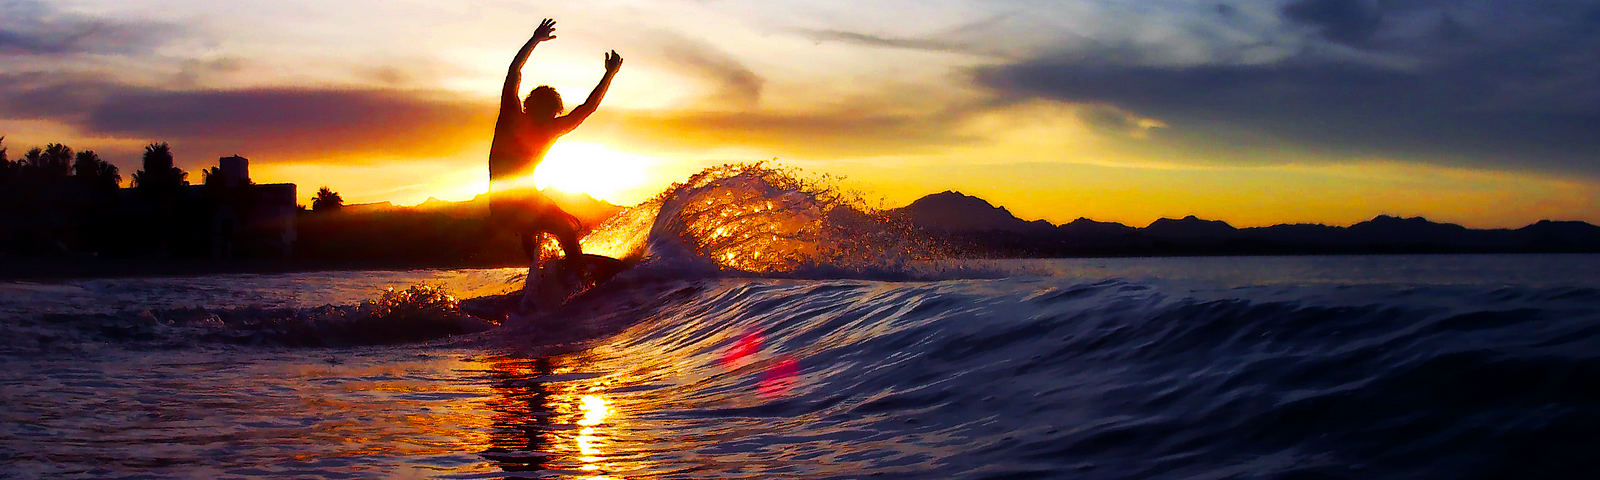 A man skimboarding in the surf at sunset (Photo Credit: Angelica Olson (me))